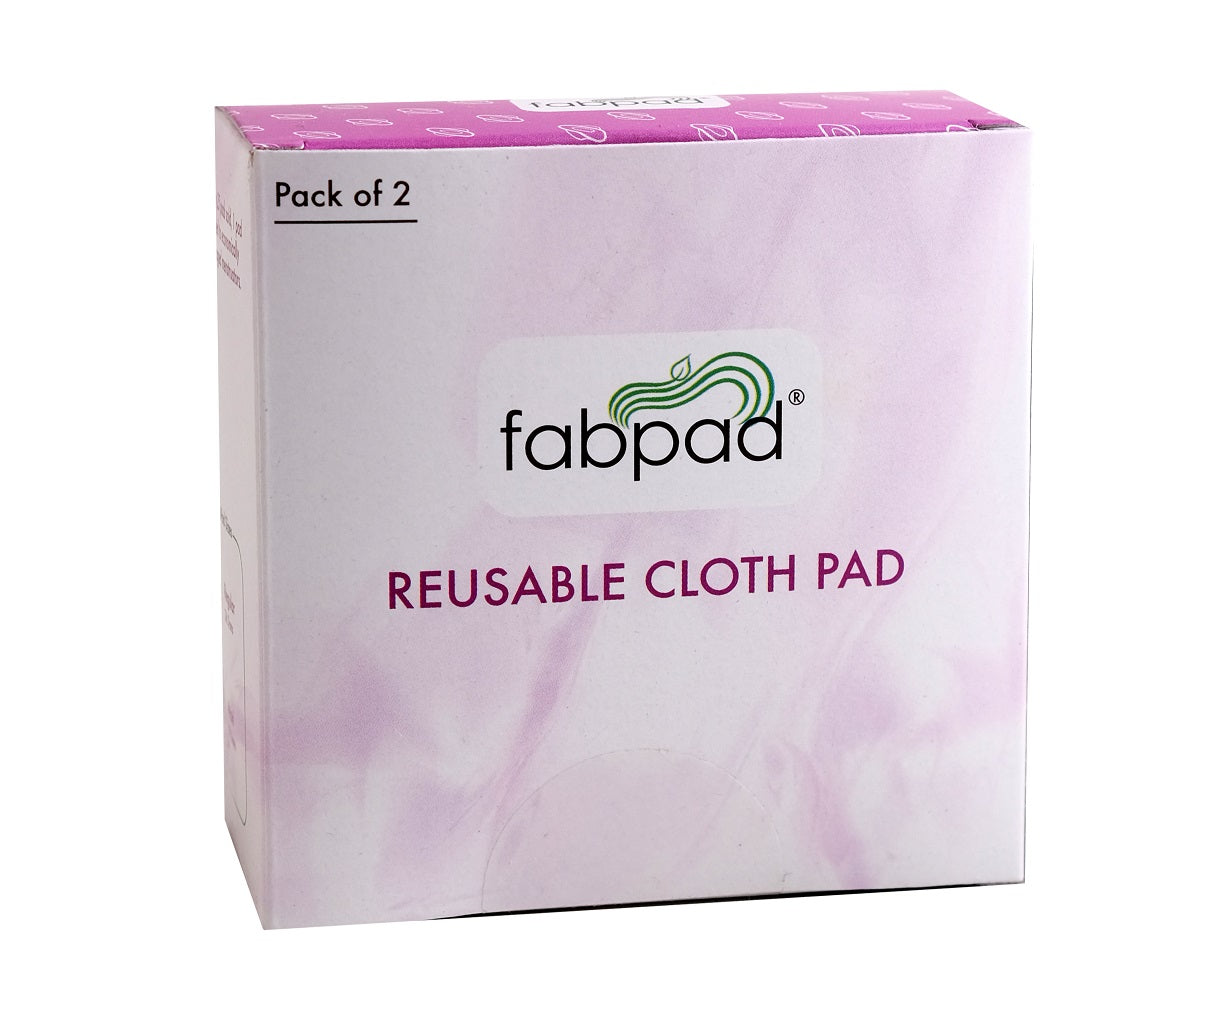 FabPad Reusable Washable Sanitary Cloth Pads Napkins (Pack of 2, Asst Colors)